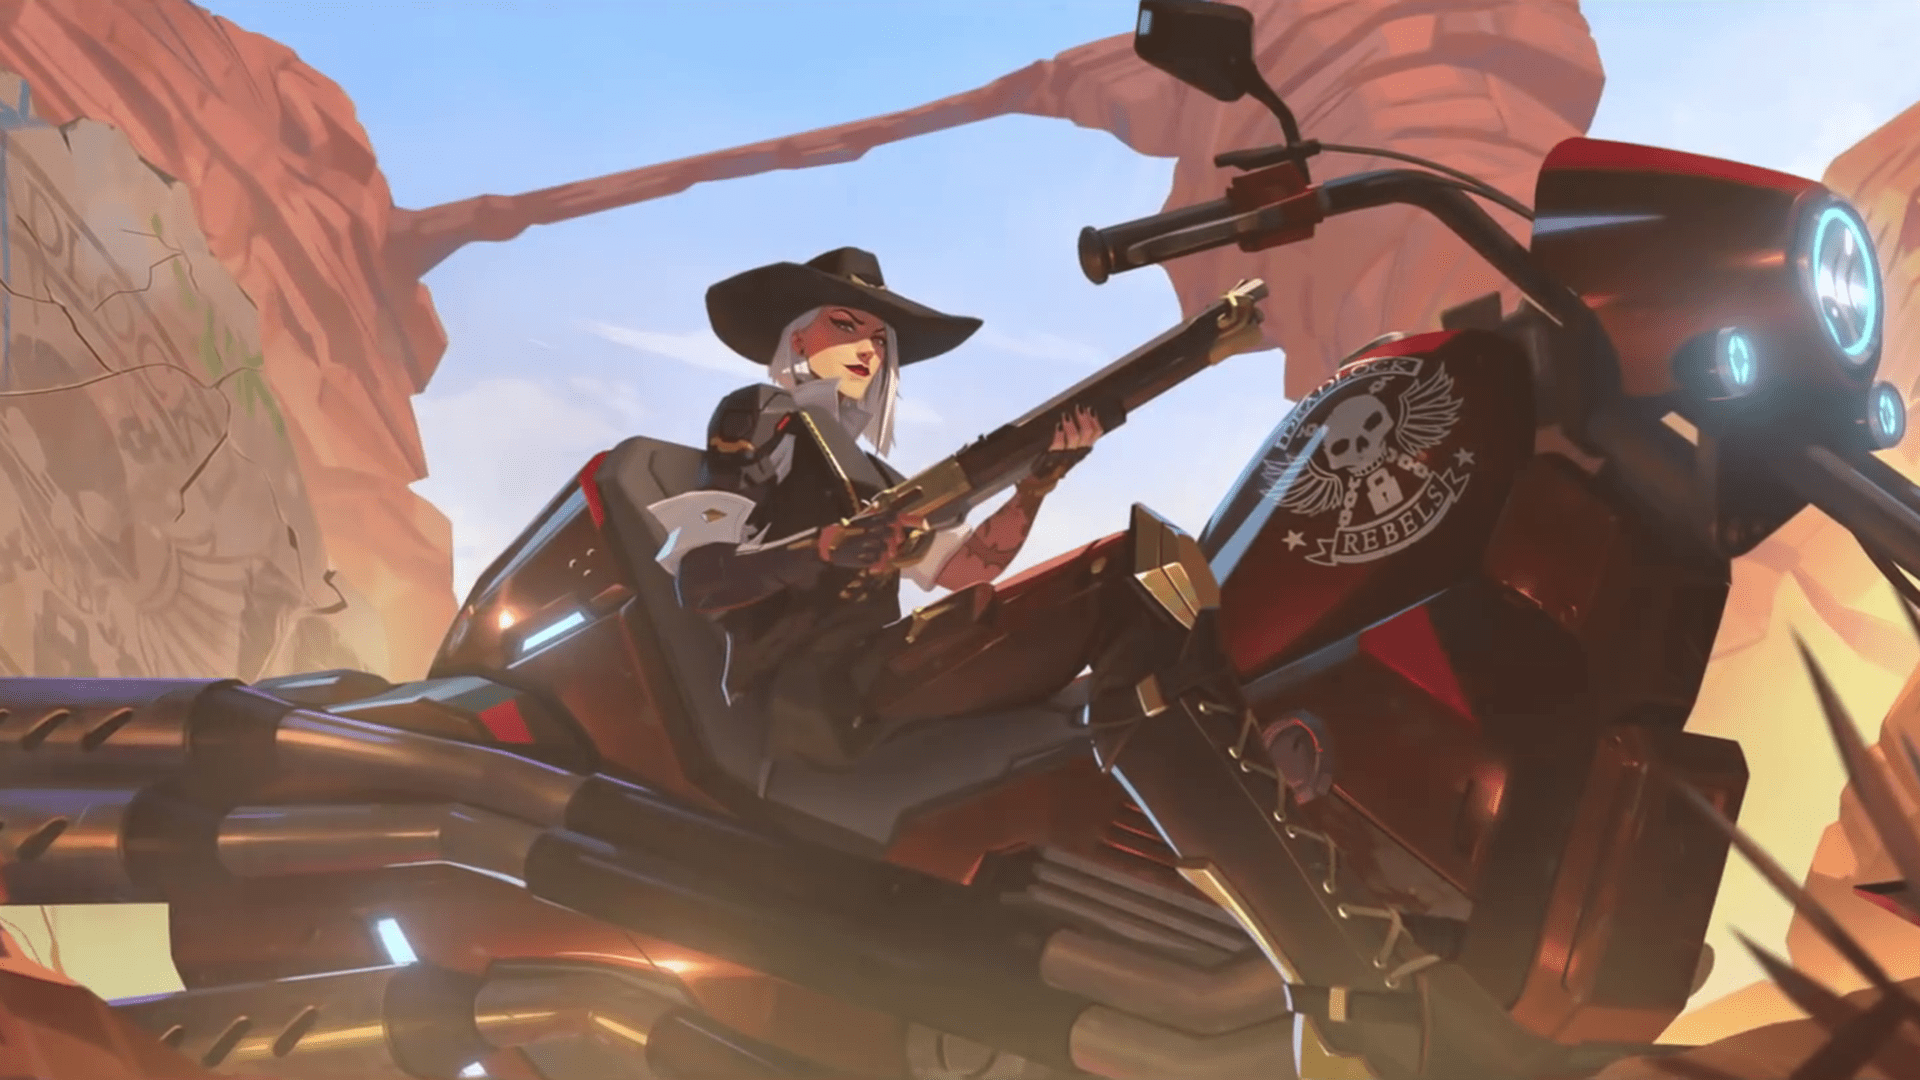 Overwatch Ashe Wallpapers Top Free Overwatch Ashe Backgrounds Wallpaperaccess